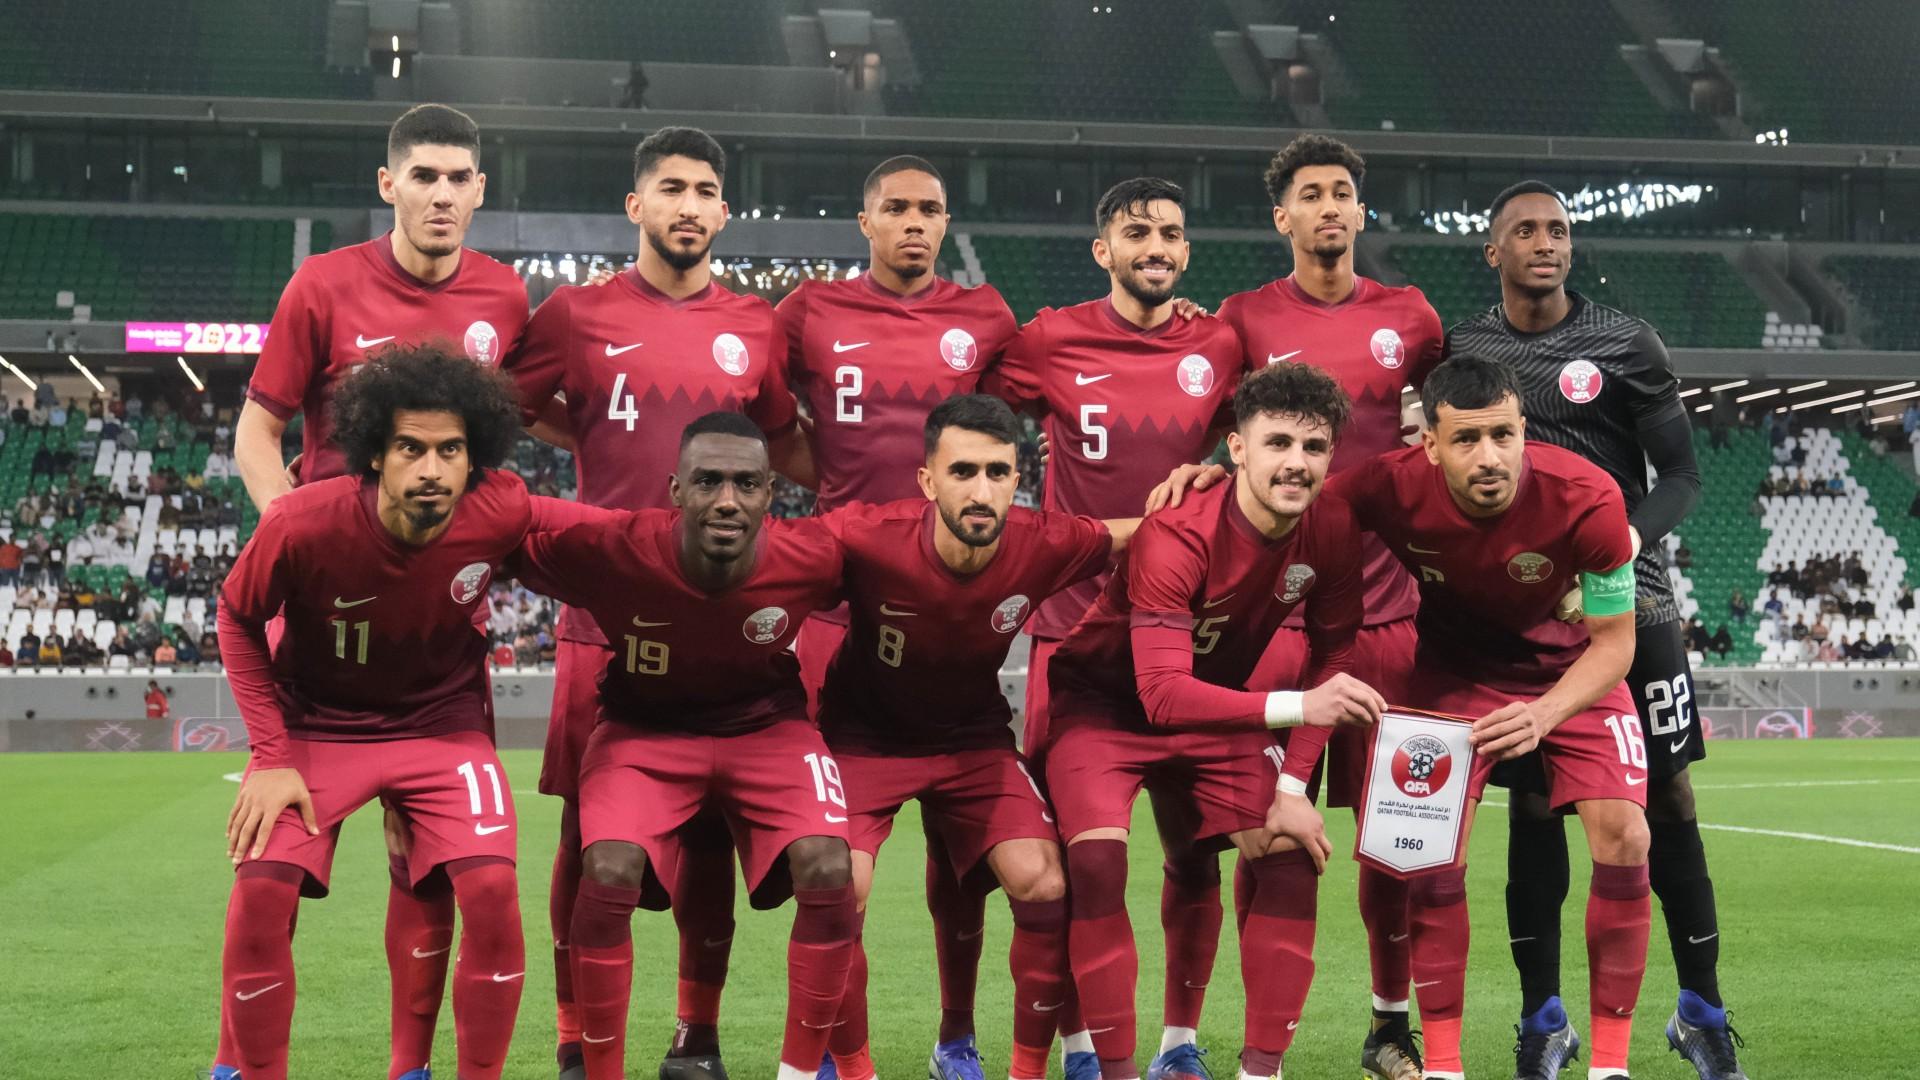 Qatar World Cup draw 2022: Group A results with Senegal, Netherlands, matches, fixtures, star players, roster and coach